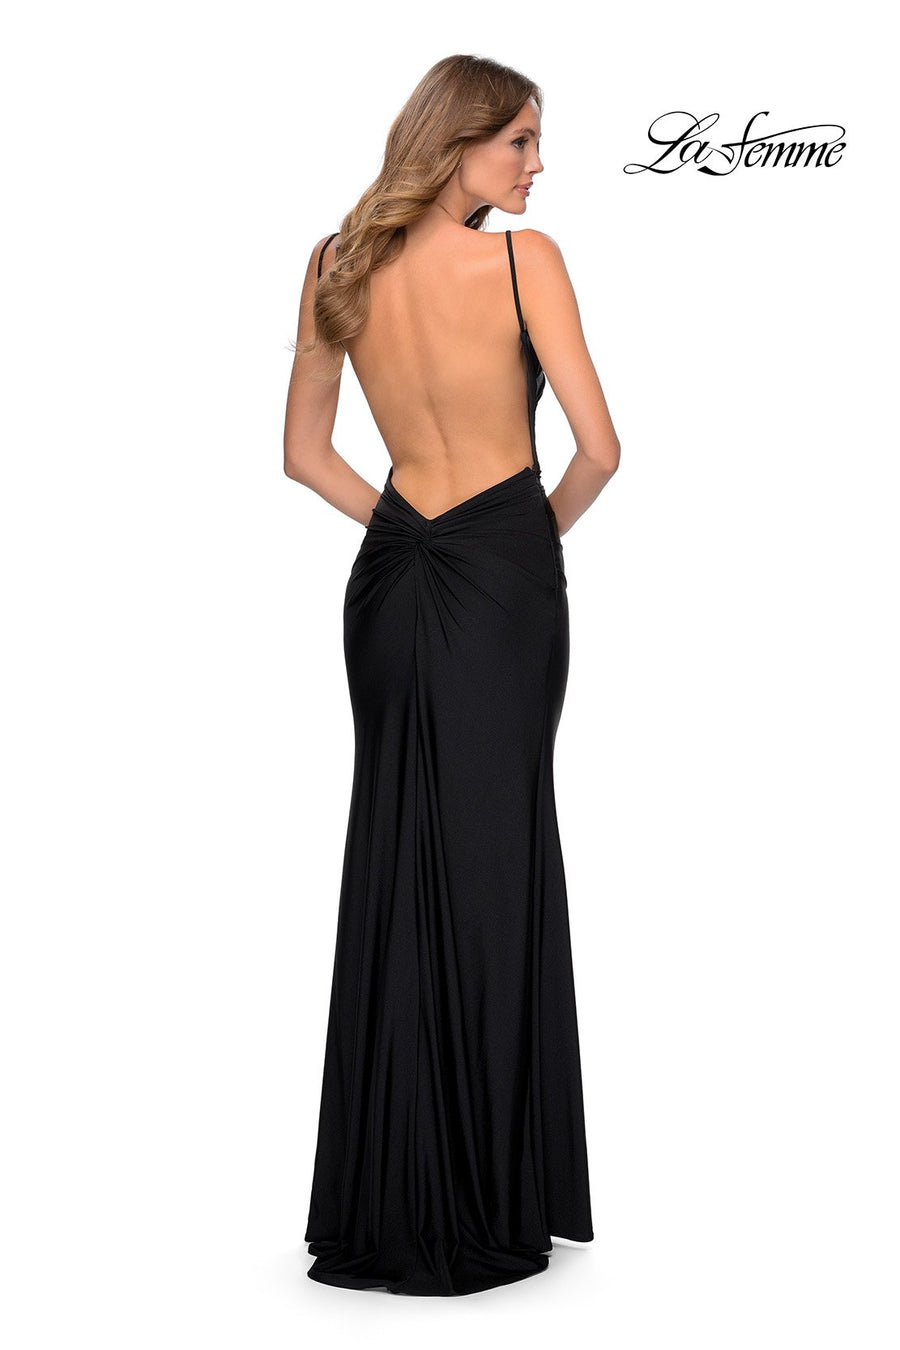 La Femme 28287 prom dress images.  La Femme 28287 is available in these colors: Black, Hot Pink, Neon Yellow, Royal Blue.